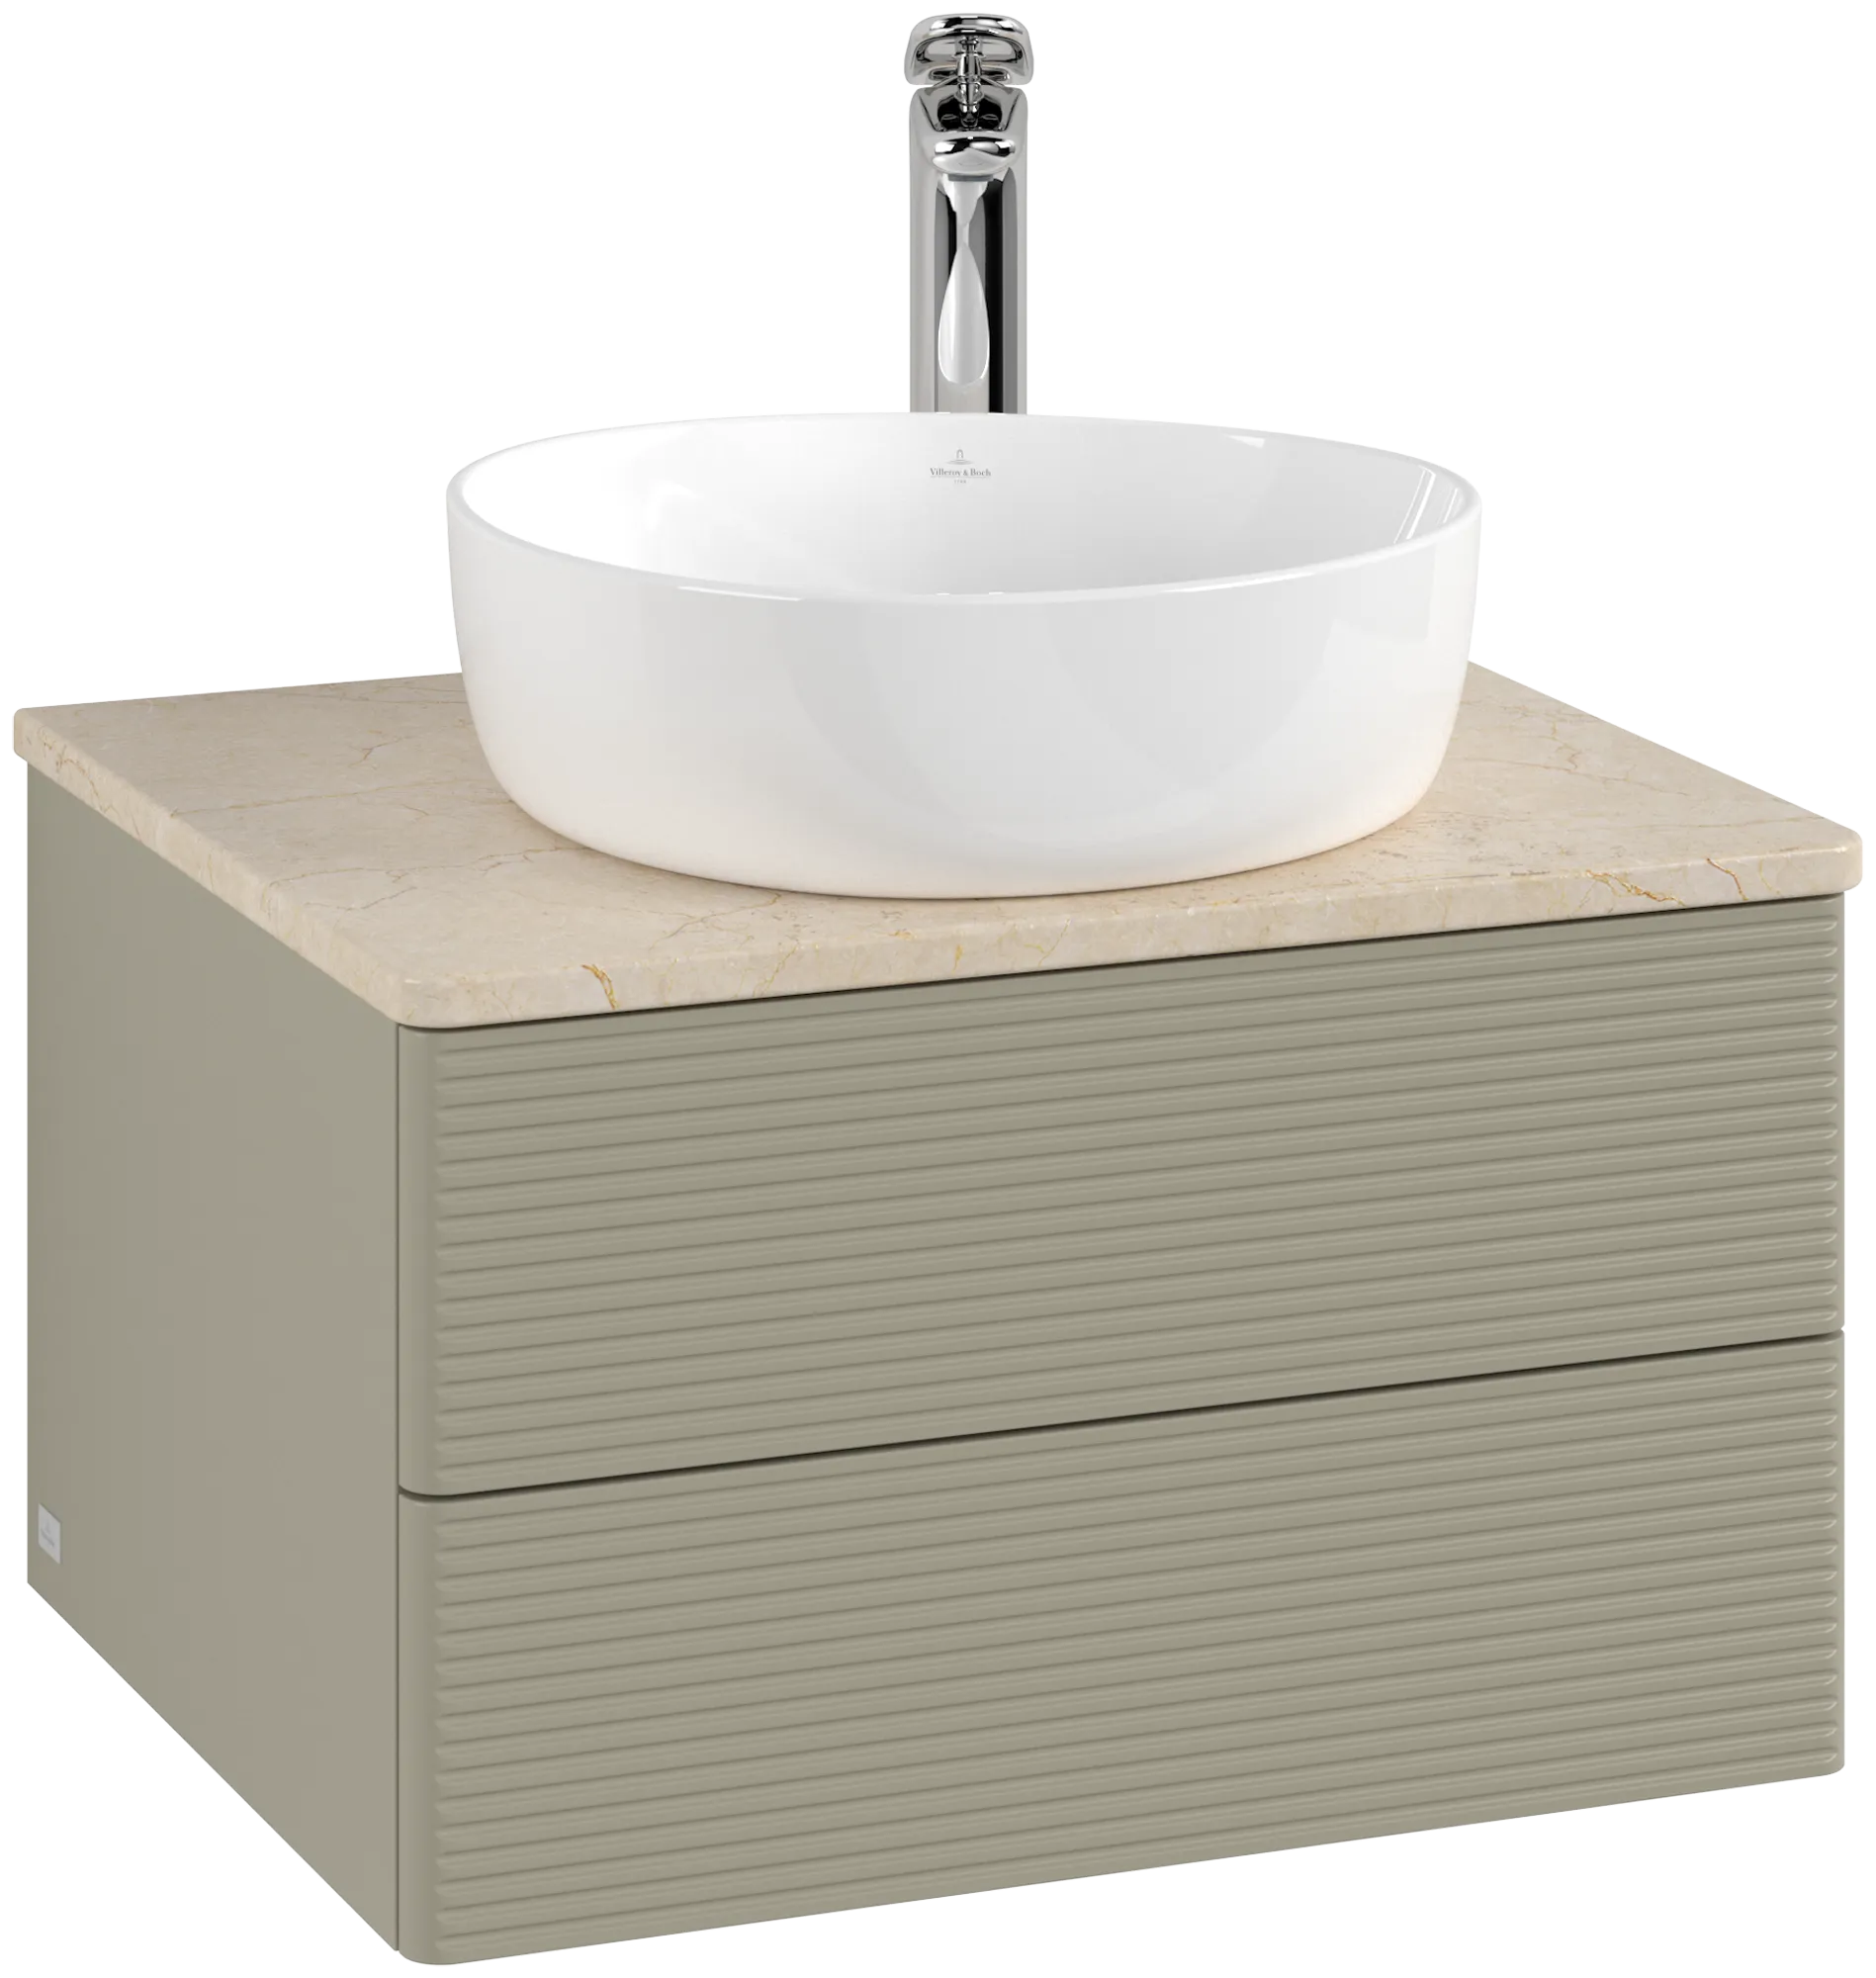 Obrázek VILLEROY BOCH Antao Vanity unit, with lighting, 2 pull-out compartments, 600 x 360 x 500 mm, Front with grain texture, Stone Grey Matt Lacquer / Botticino #L18153HK